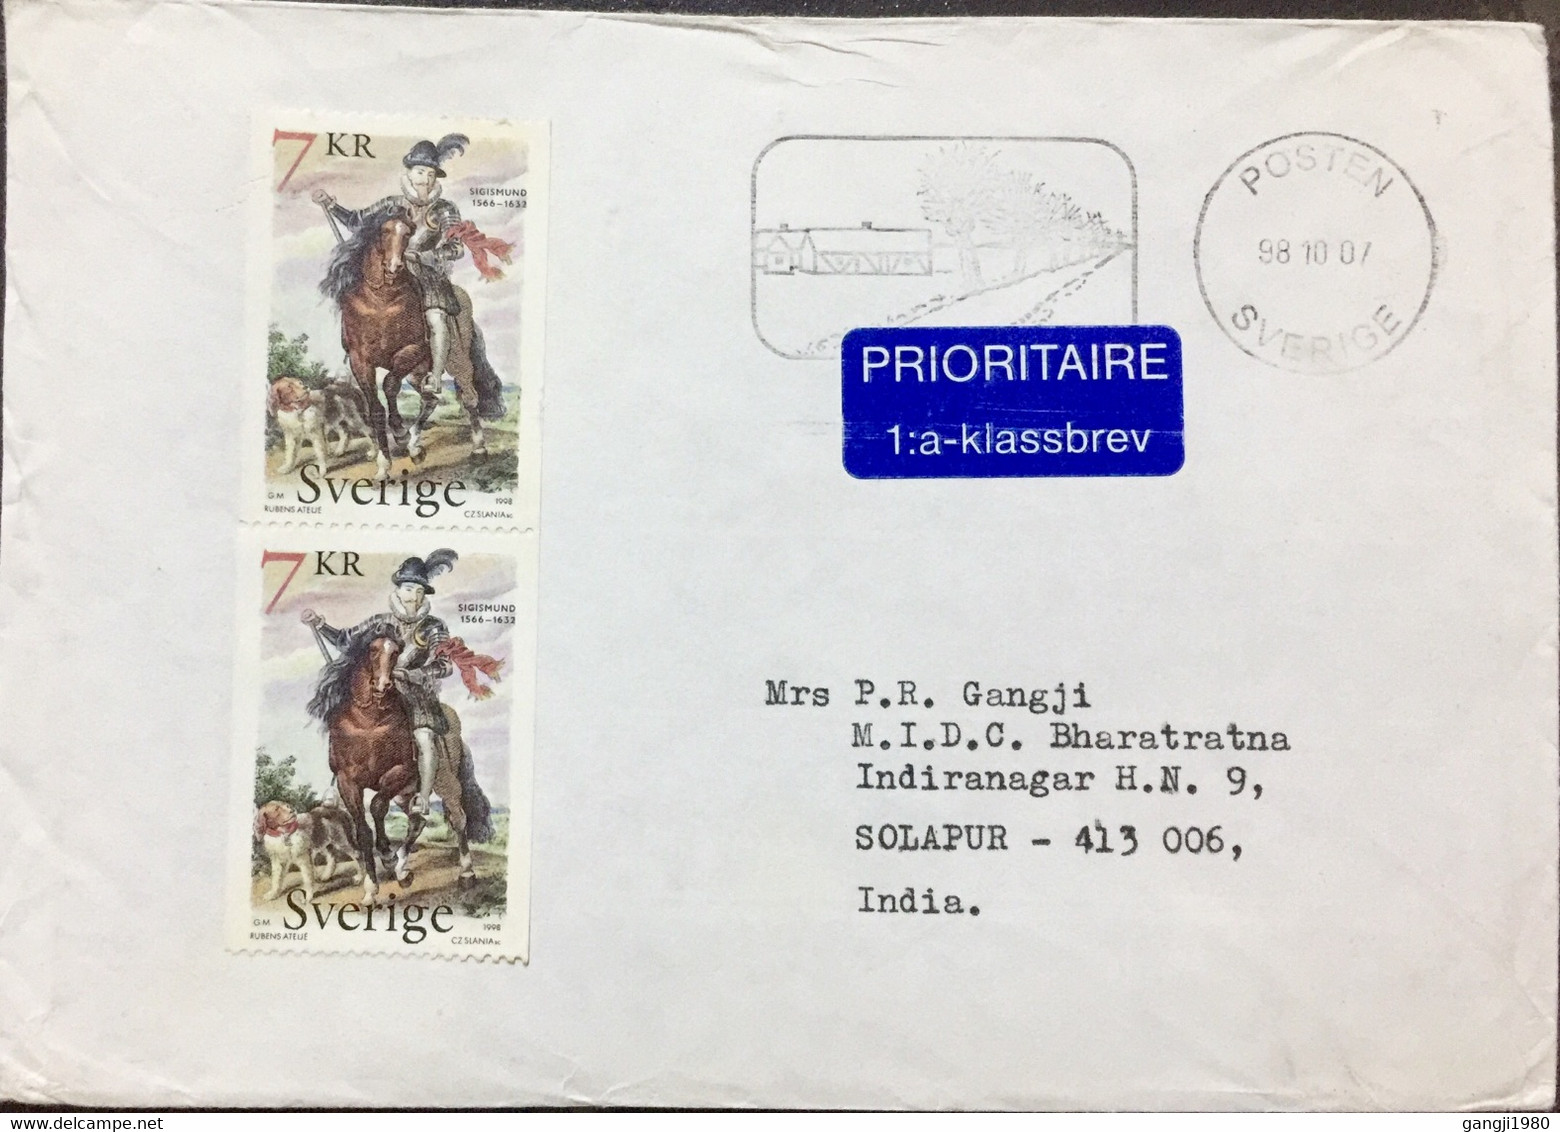 SWEDEN 2007, AIRMAIL COVER USED TO INDIA,POSTEN PICTURAL SLOGAN,CANCELLATION!!! SIGISMUND 1998 STAMPS PAIR - Lettres & Documents